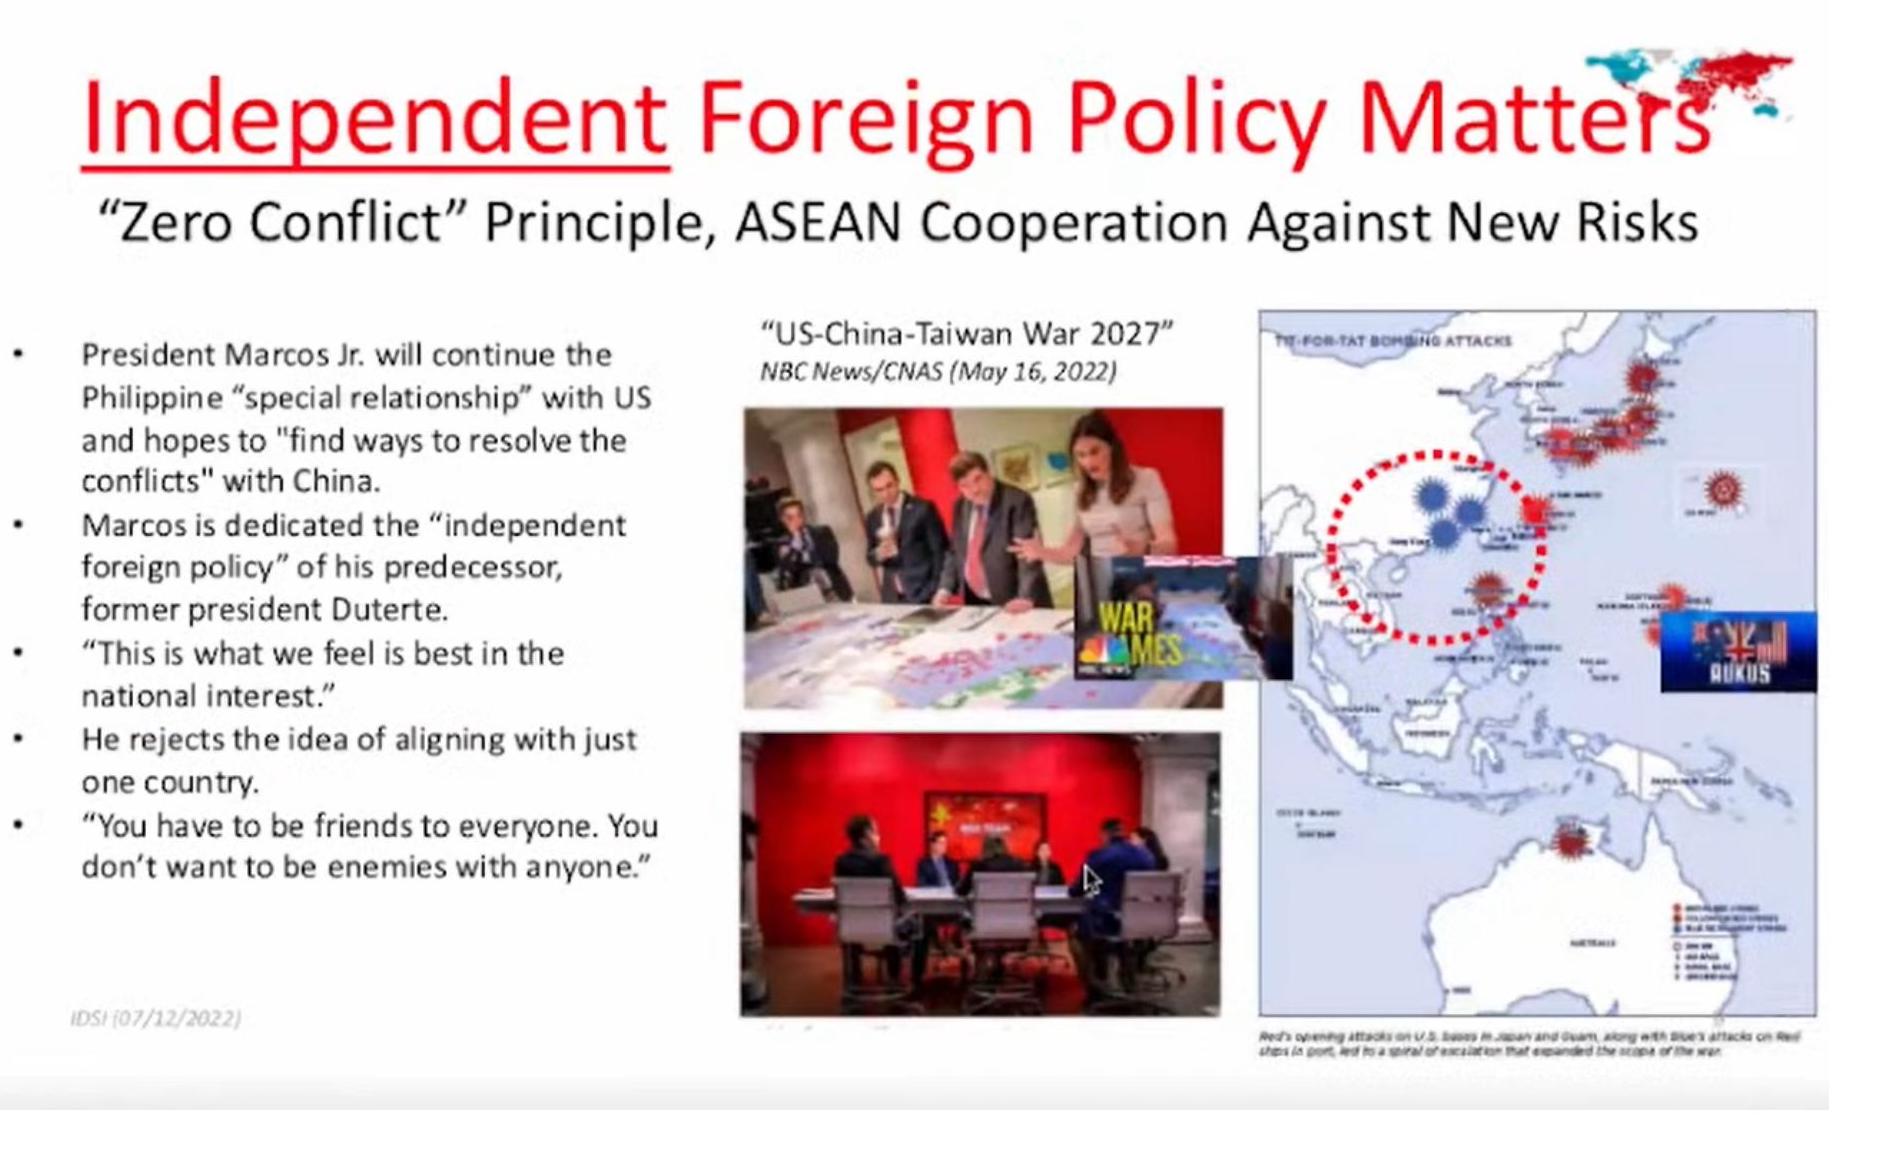 relationship between national interest and foreign policy